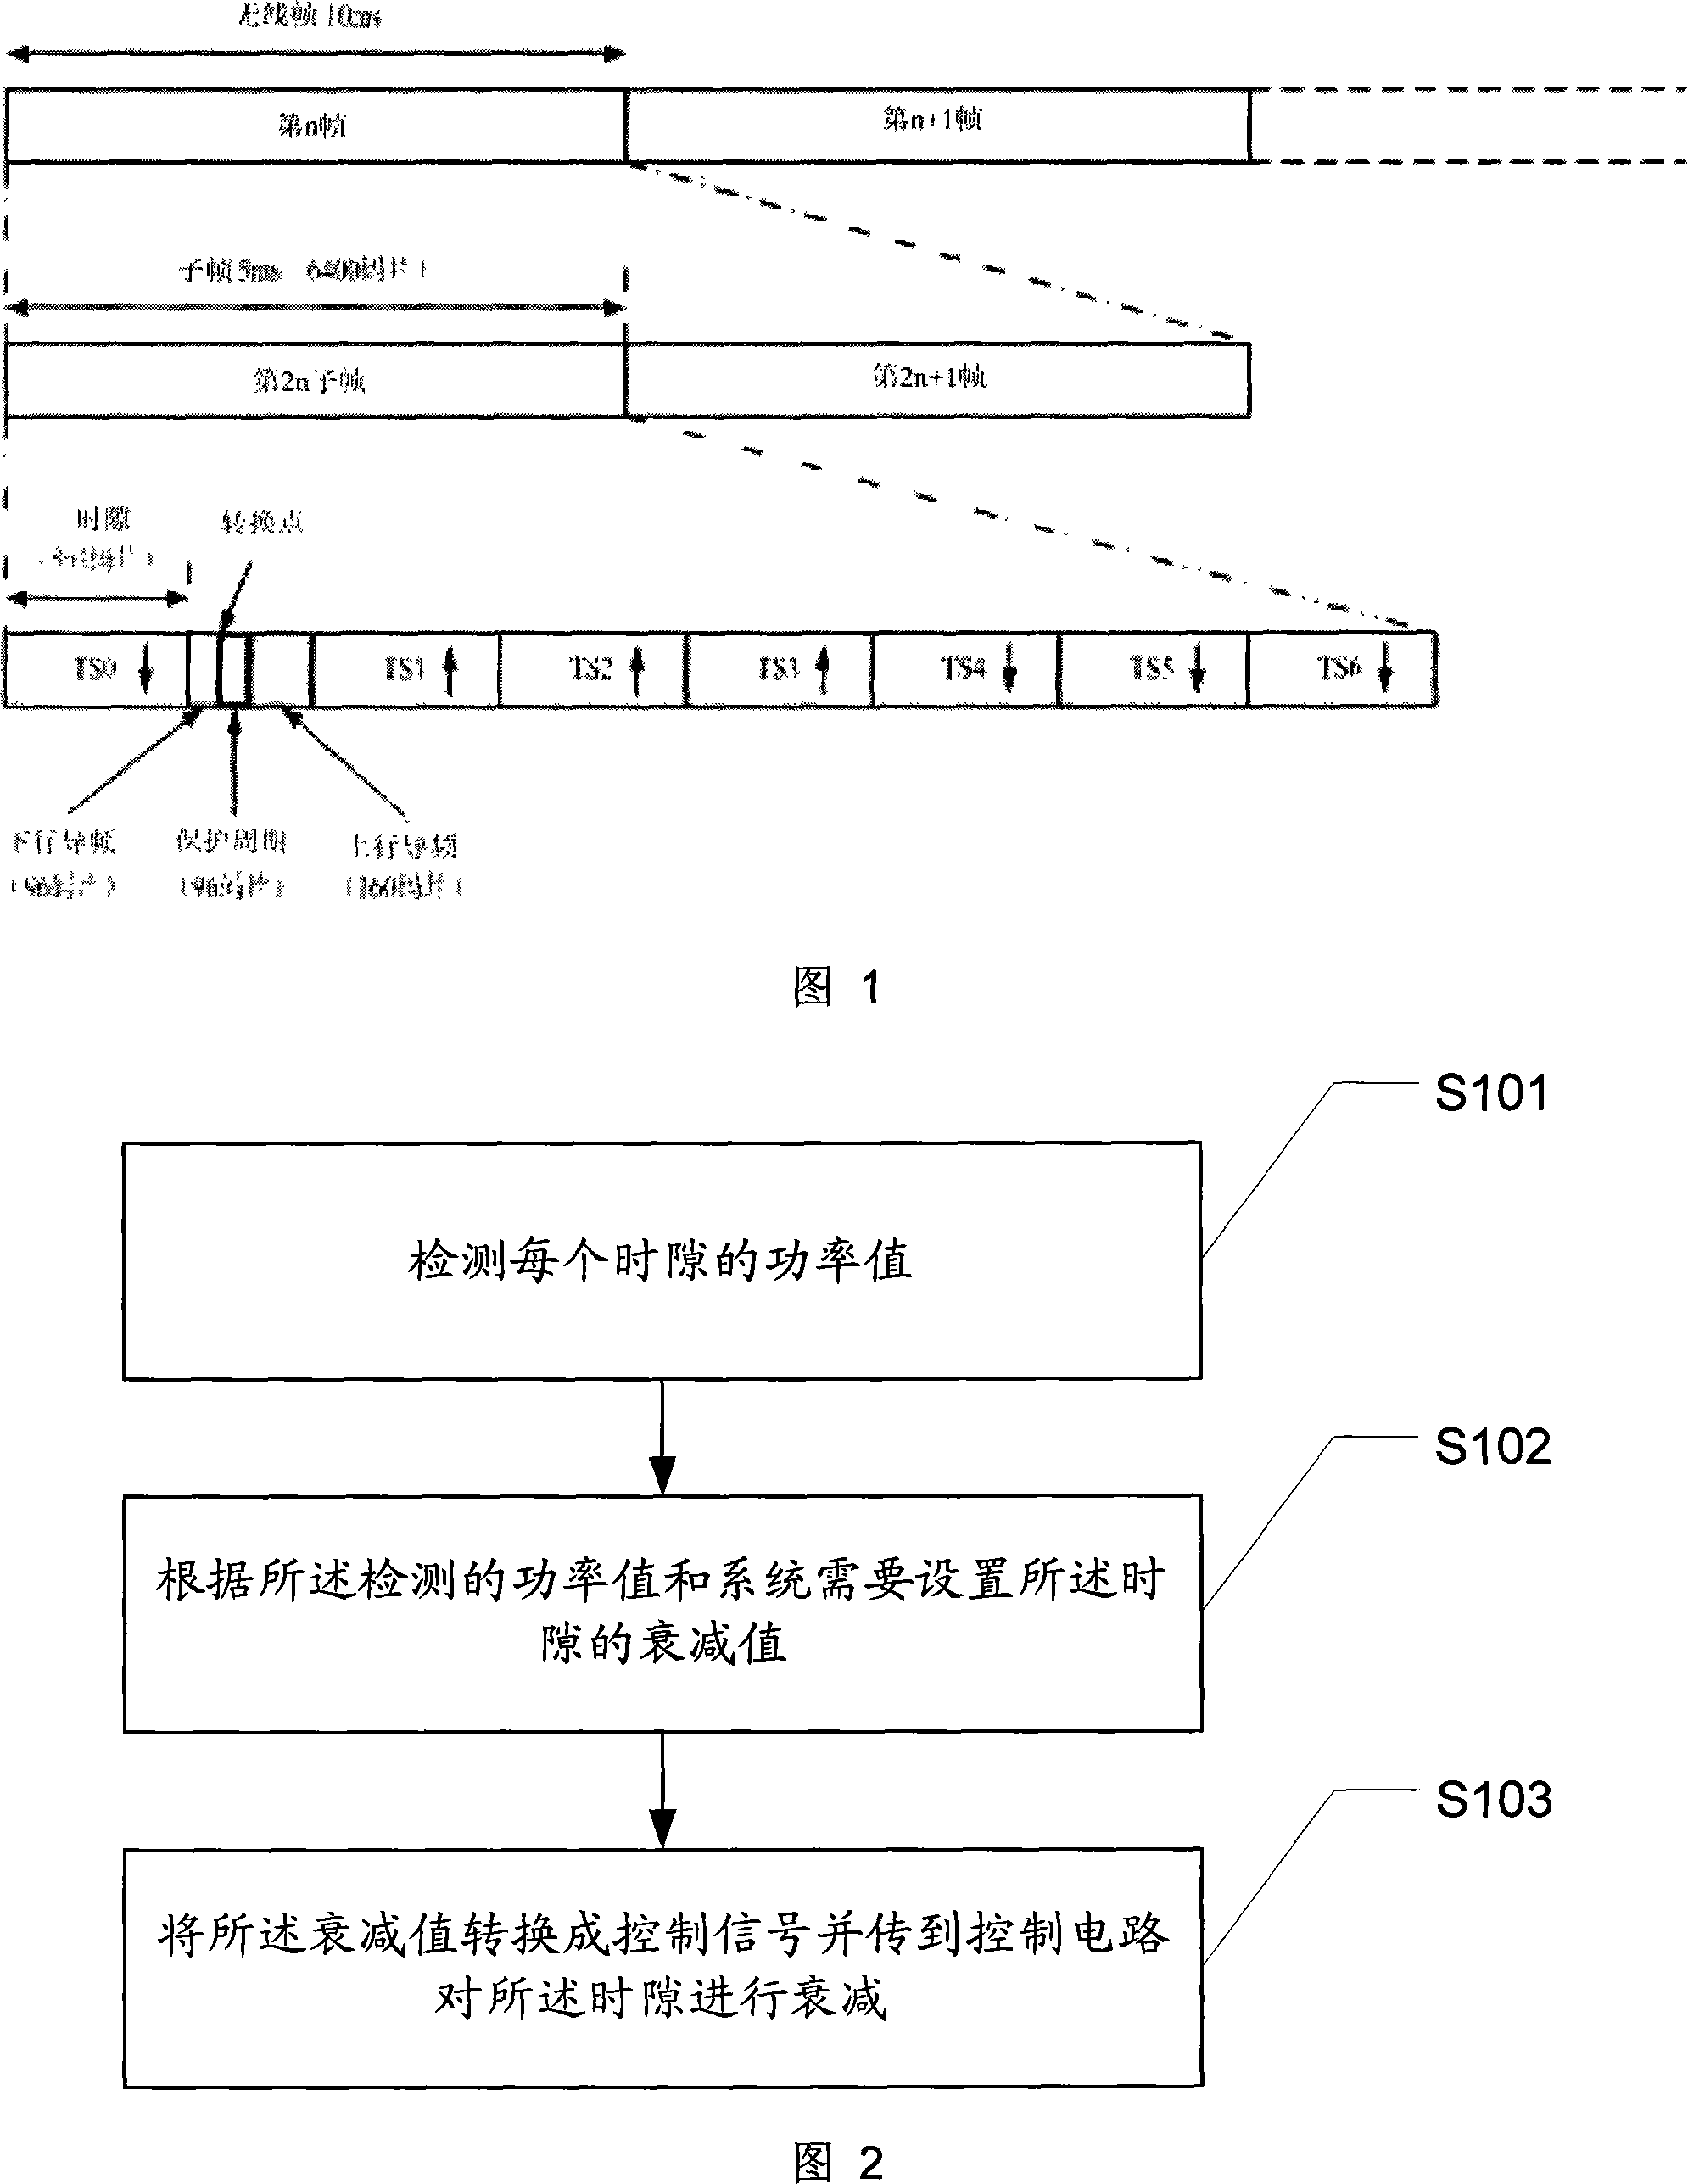 Method and system for single time slot numerically controlling attenuation